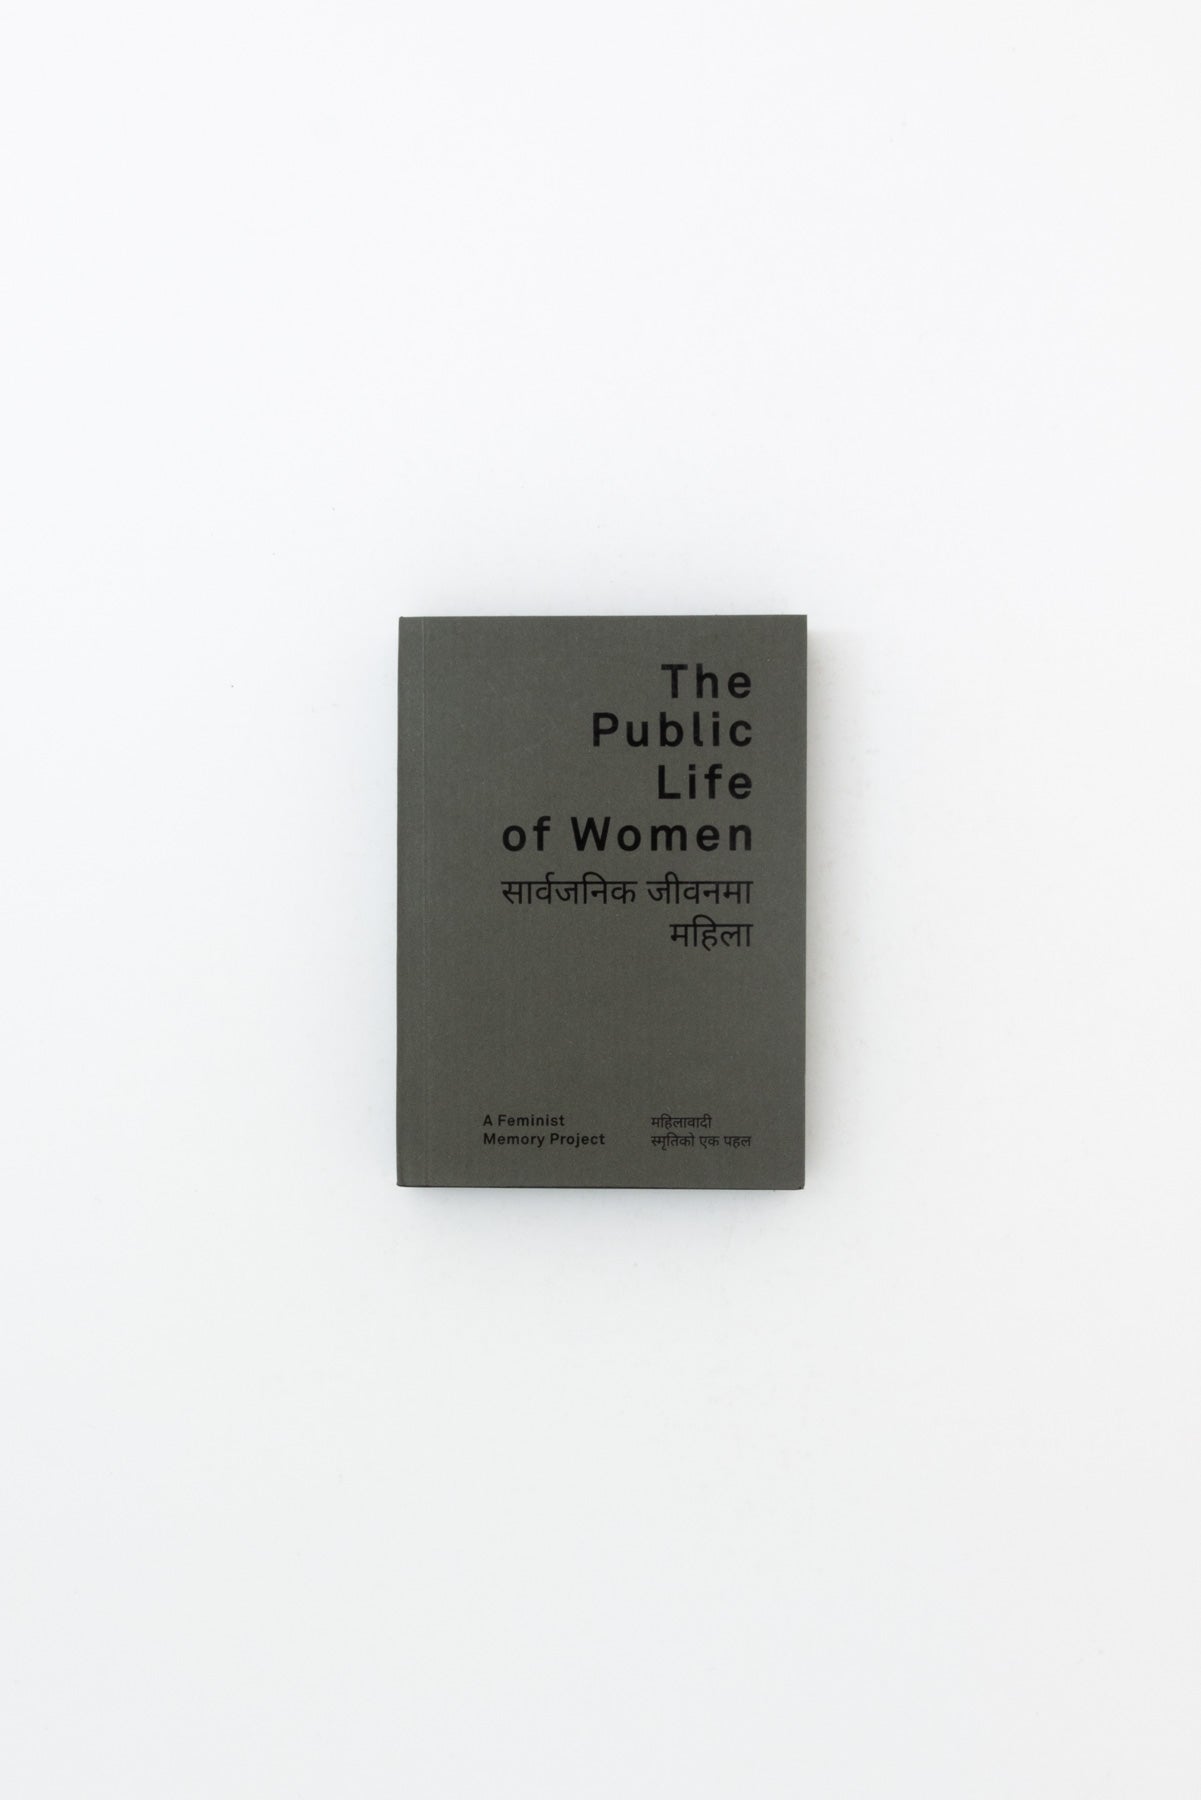 The Public Life of Women. A Feminist Memory Project.